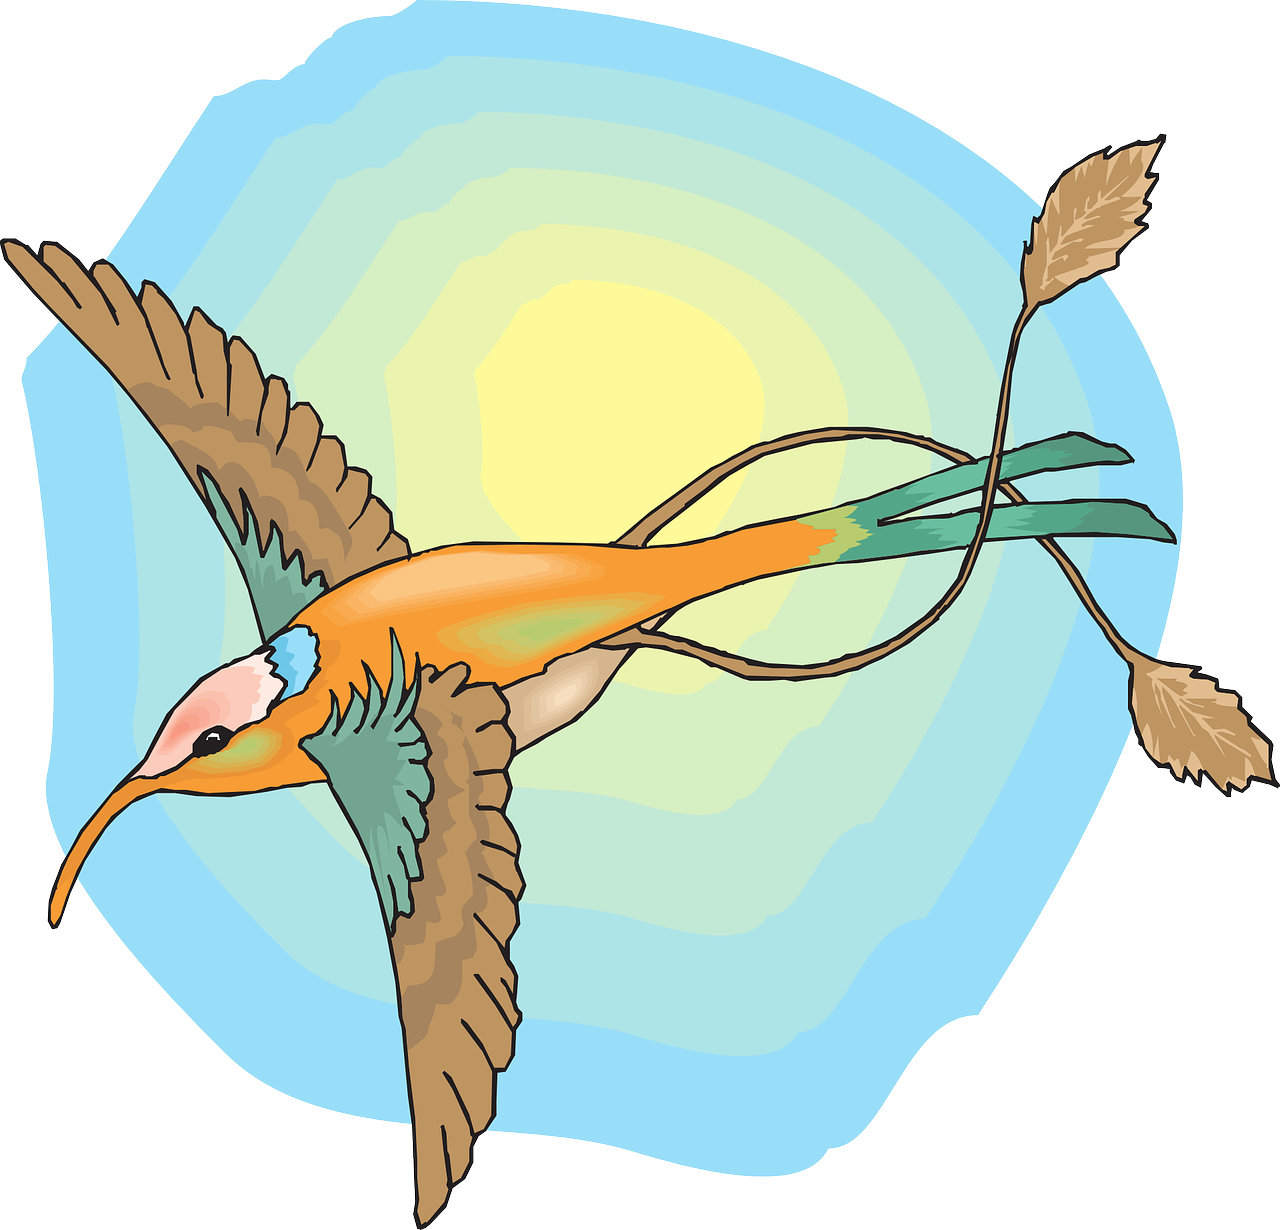 a bird that is flying in the sky, an illustration of, inspired by John James Audubon, arabesque, lumnoius colorful, with bow and arrow, sunbathing. illustration, very very happy!